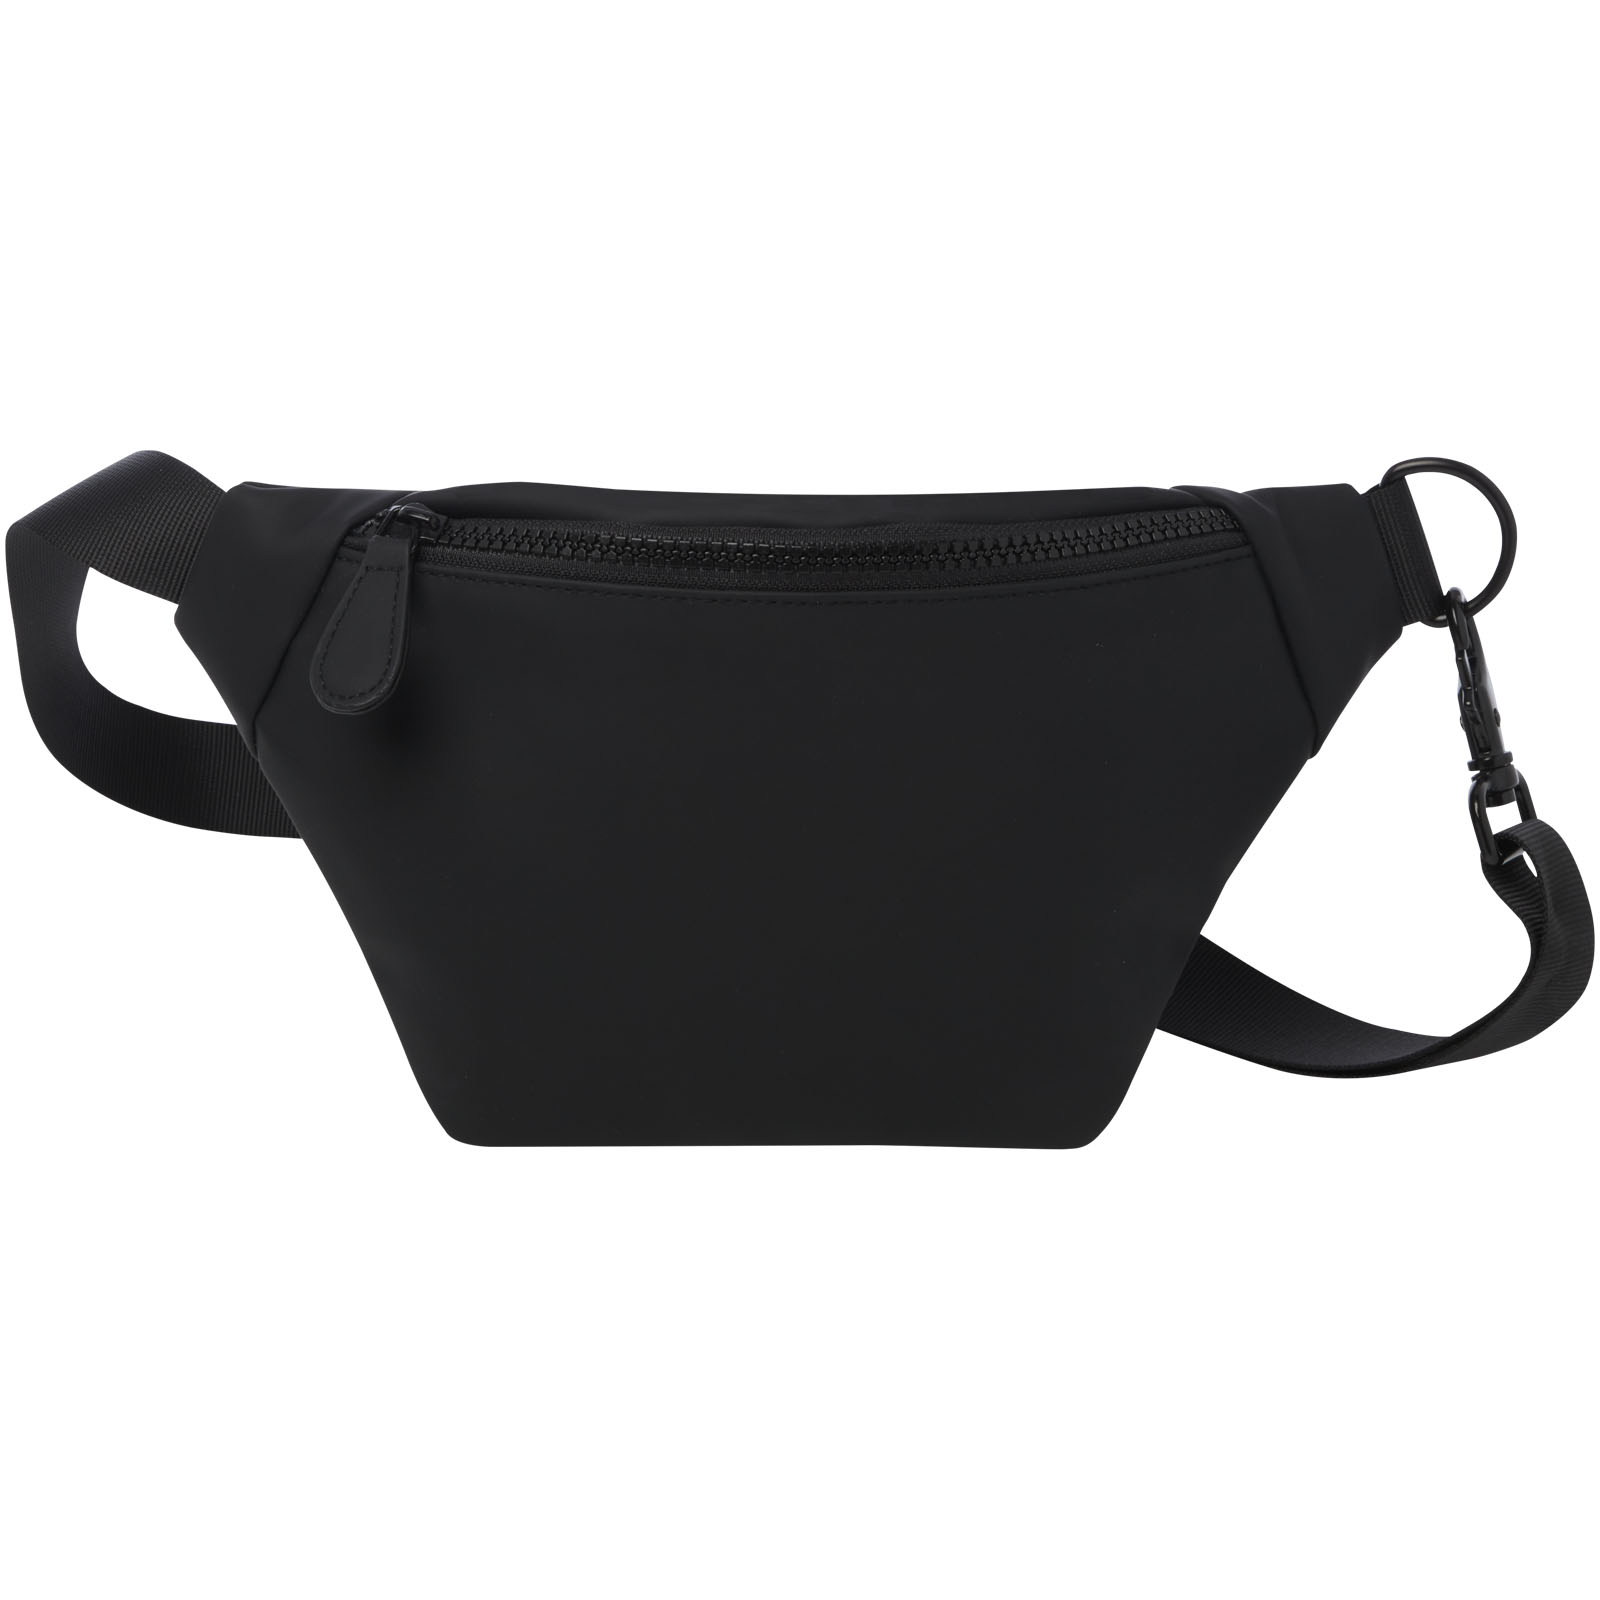 Advertising Travel Accessories - Turner fanny pack - 1